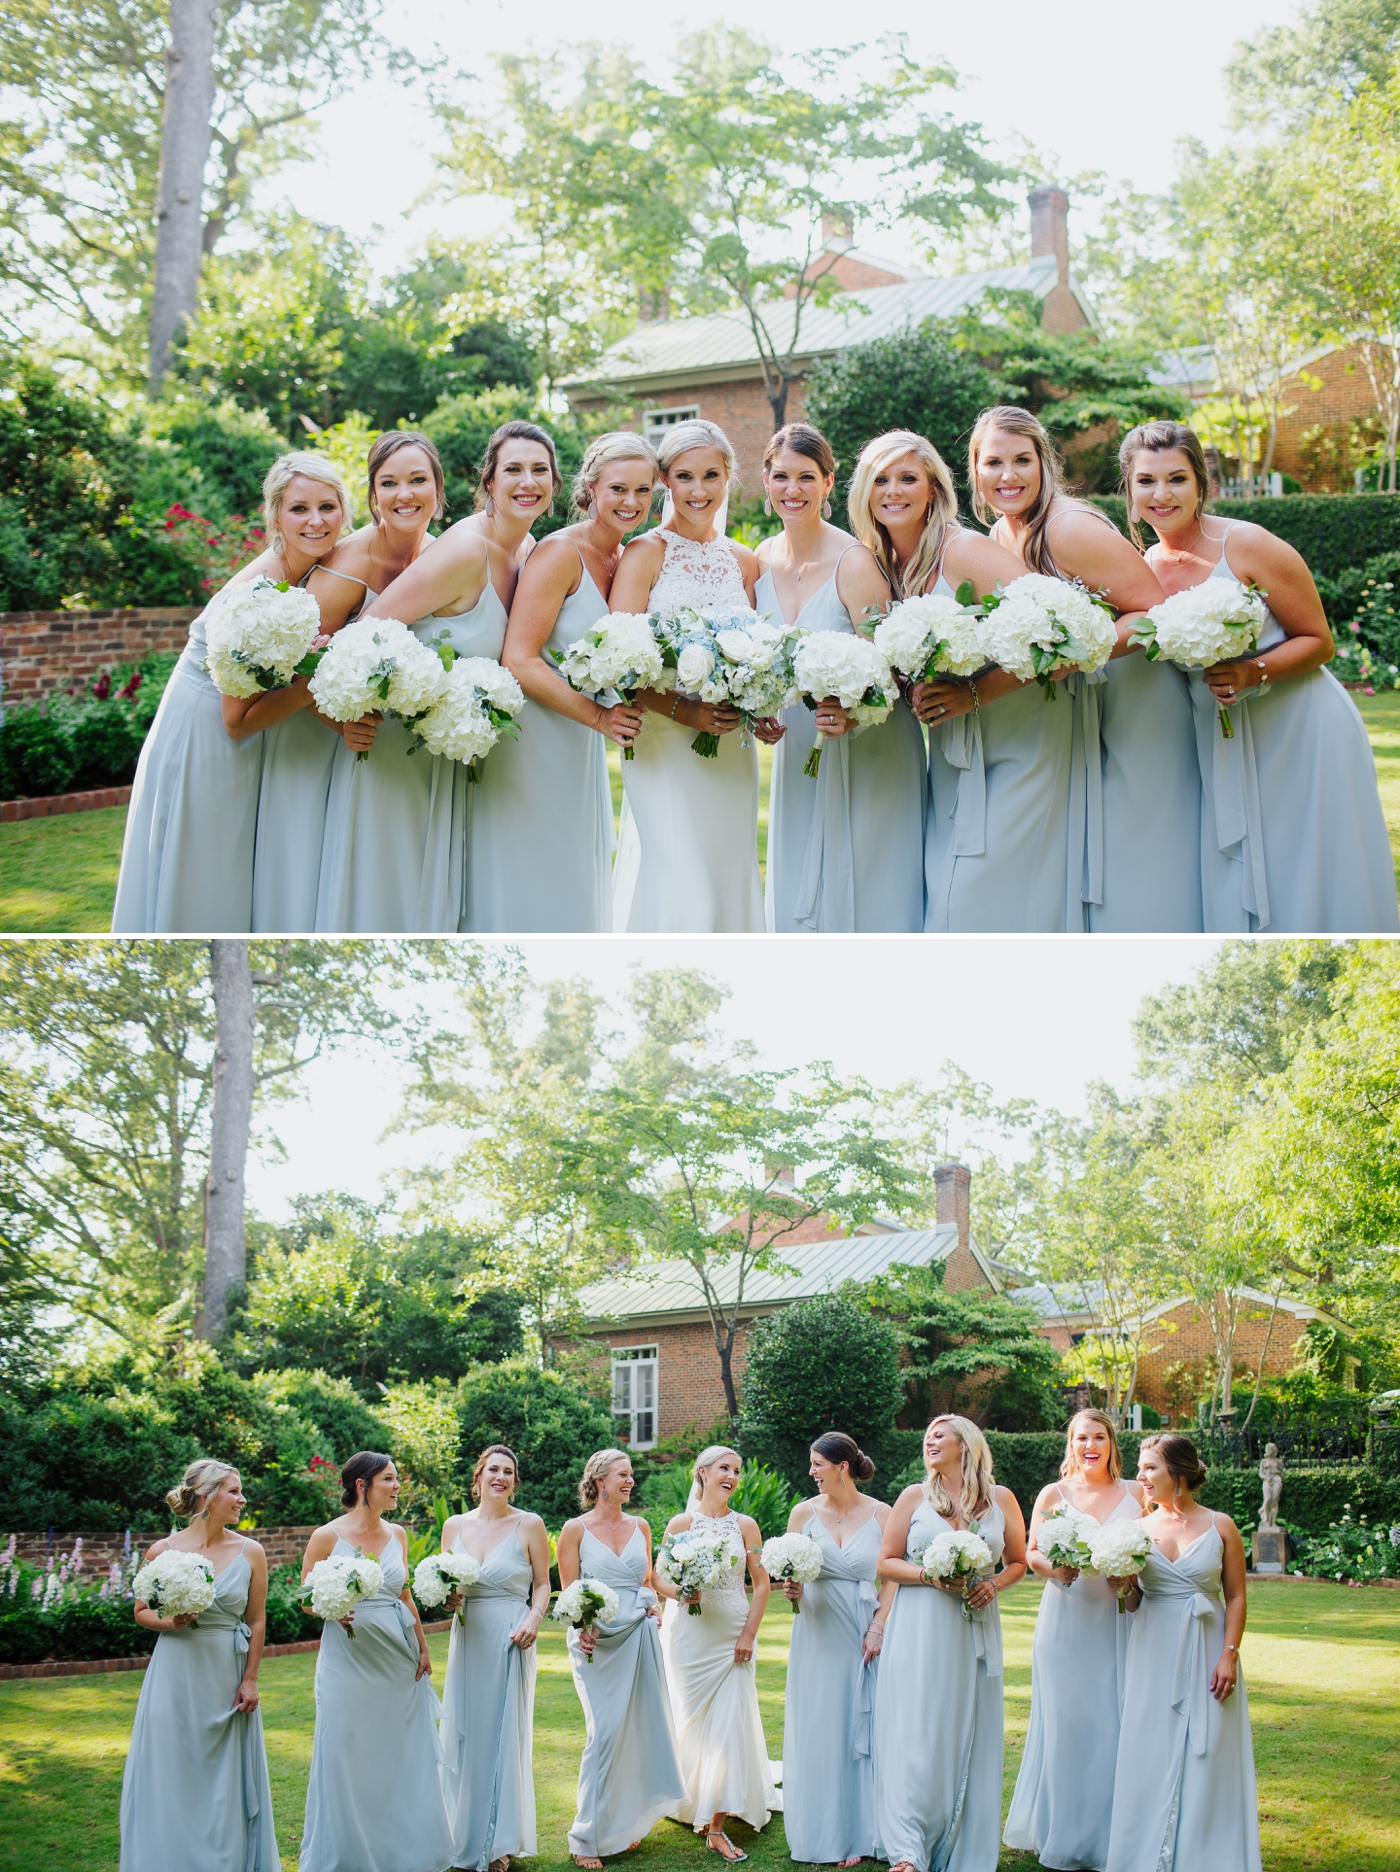 Dusty blue bridesmaids gown – Spring wedding in Athens, Georgia | Izzy and Co.